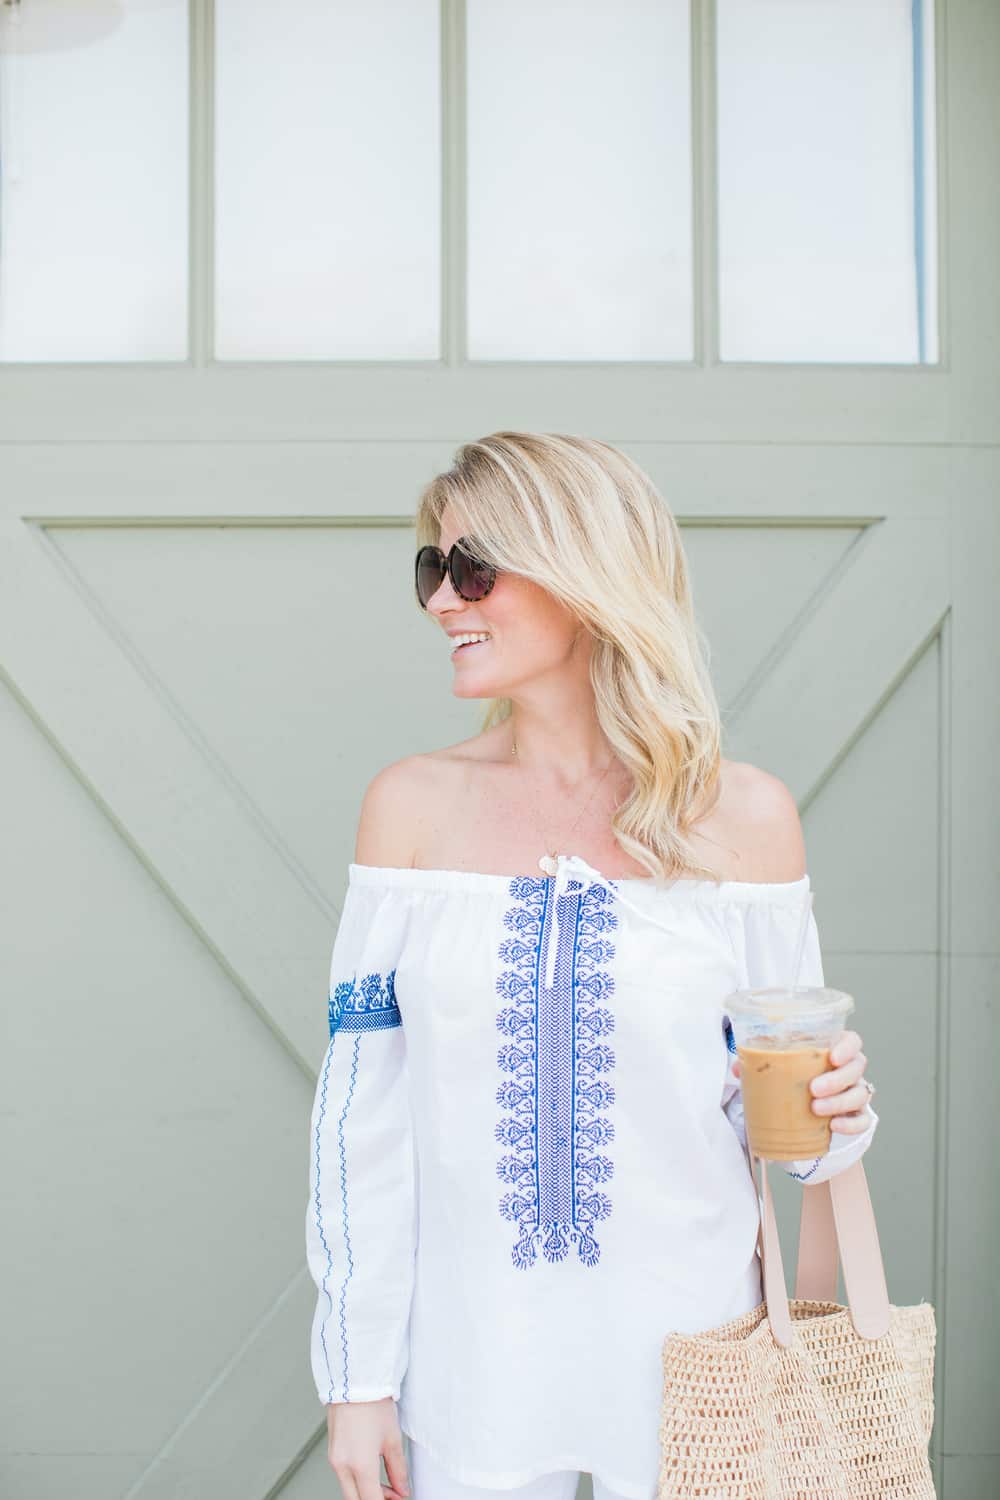 OUTFIT POST : OFF THE SHOULDER FOLKTALE TOP